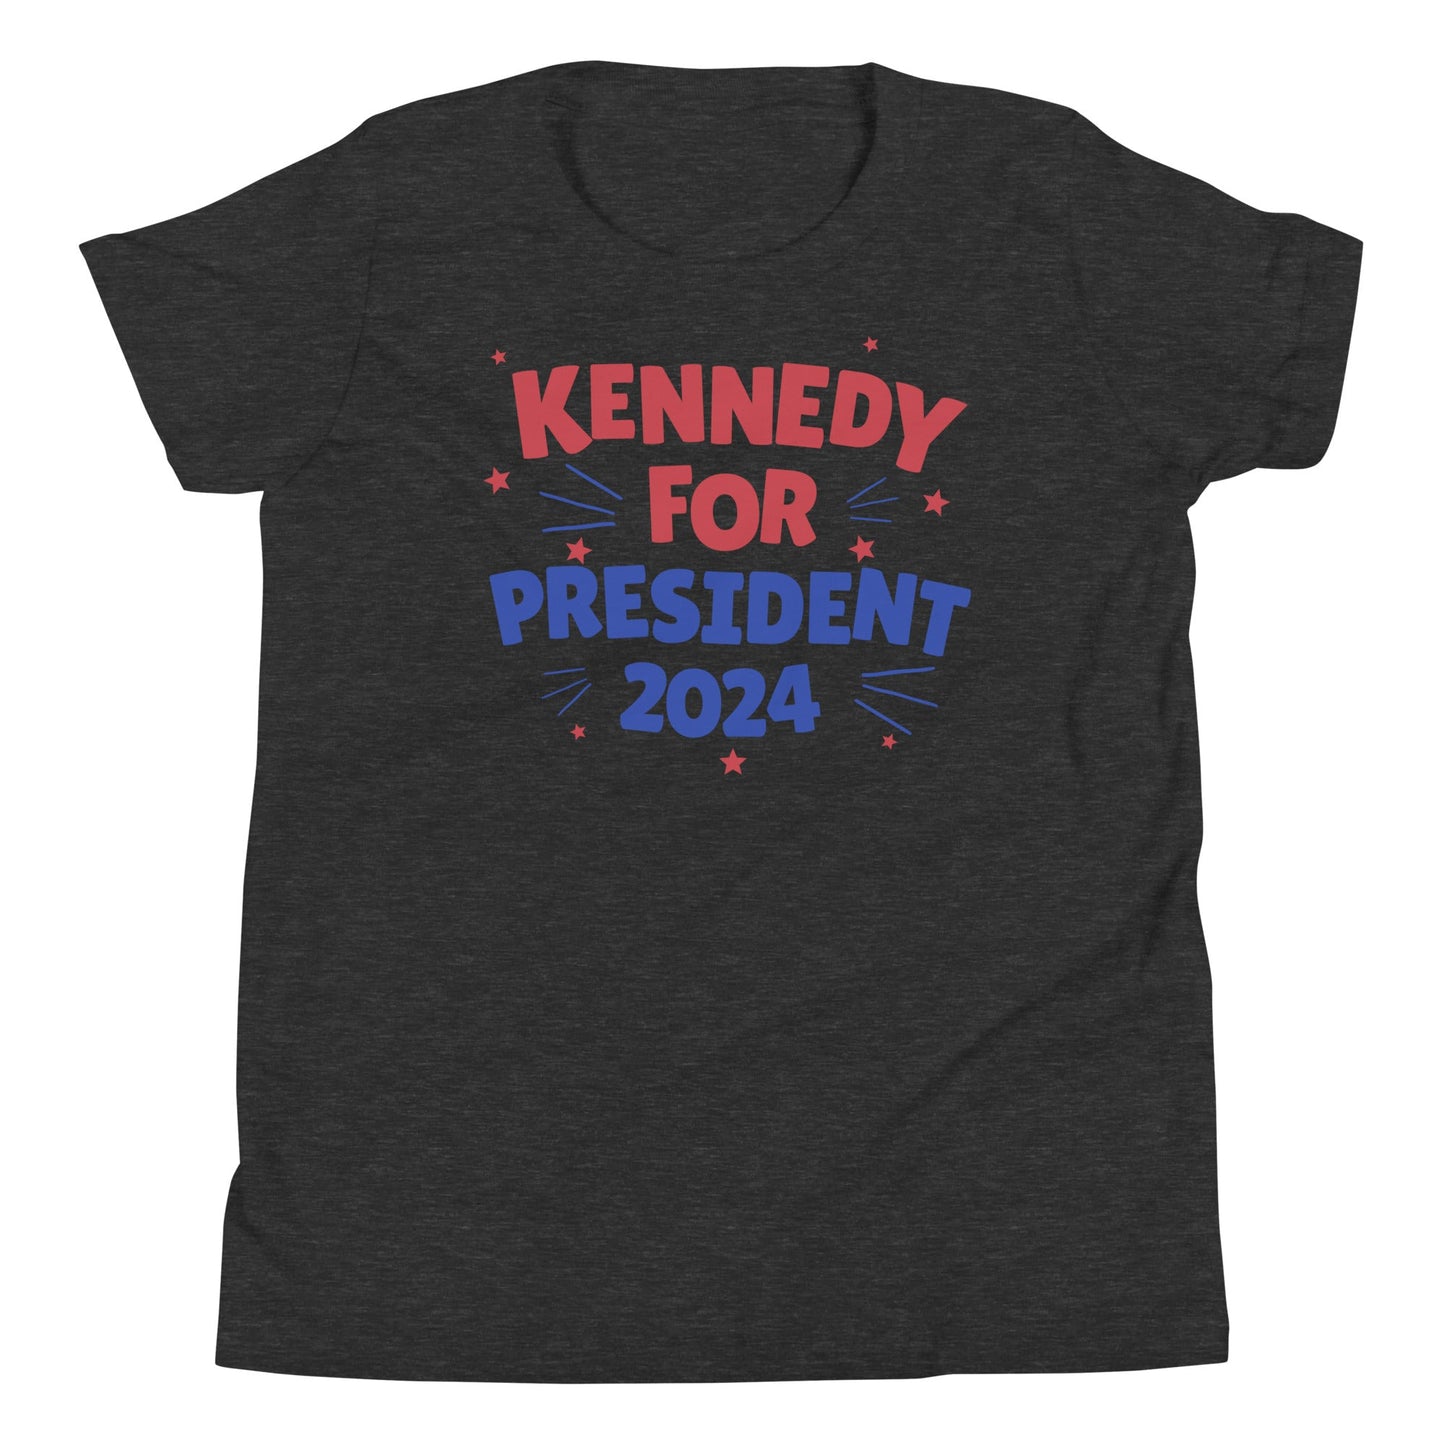 Kennedy for President Youth Tee - TEAM KENNEDY. All rights reserved